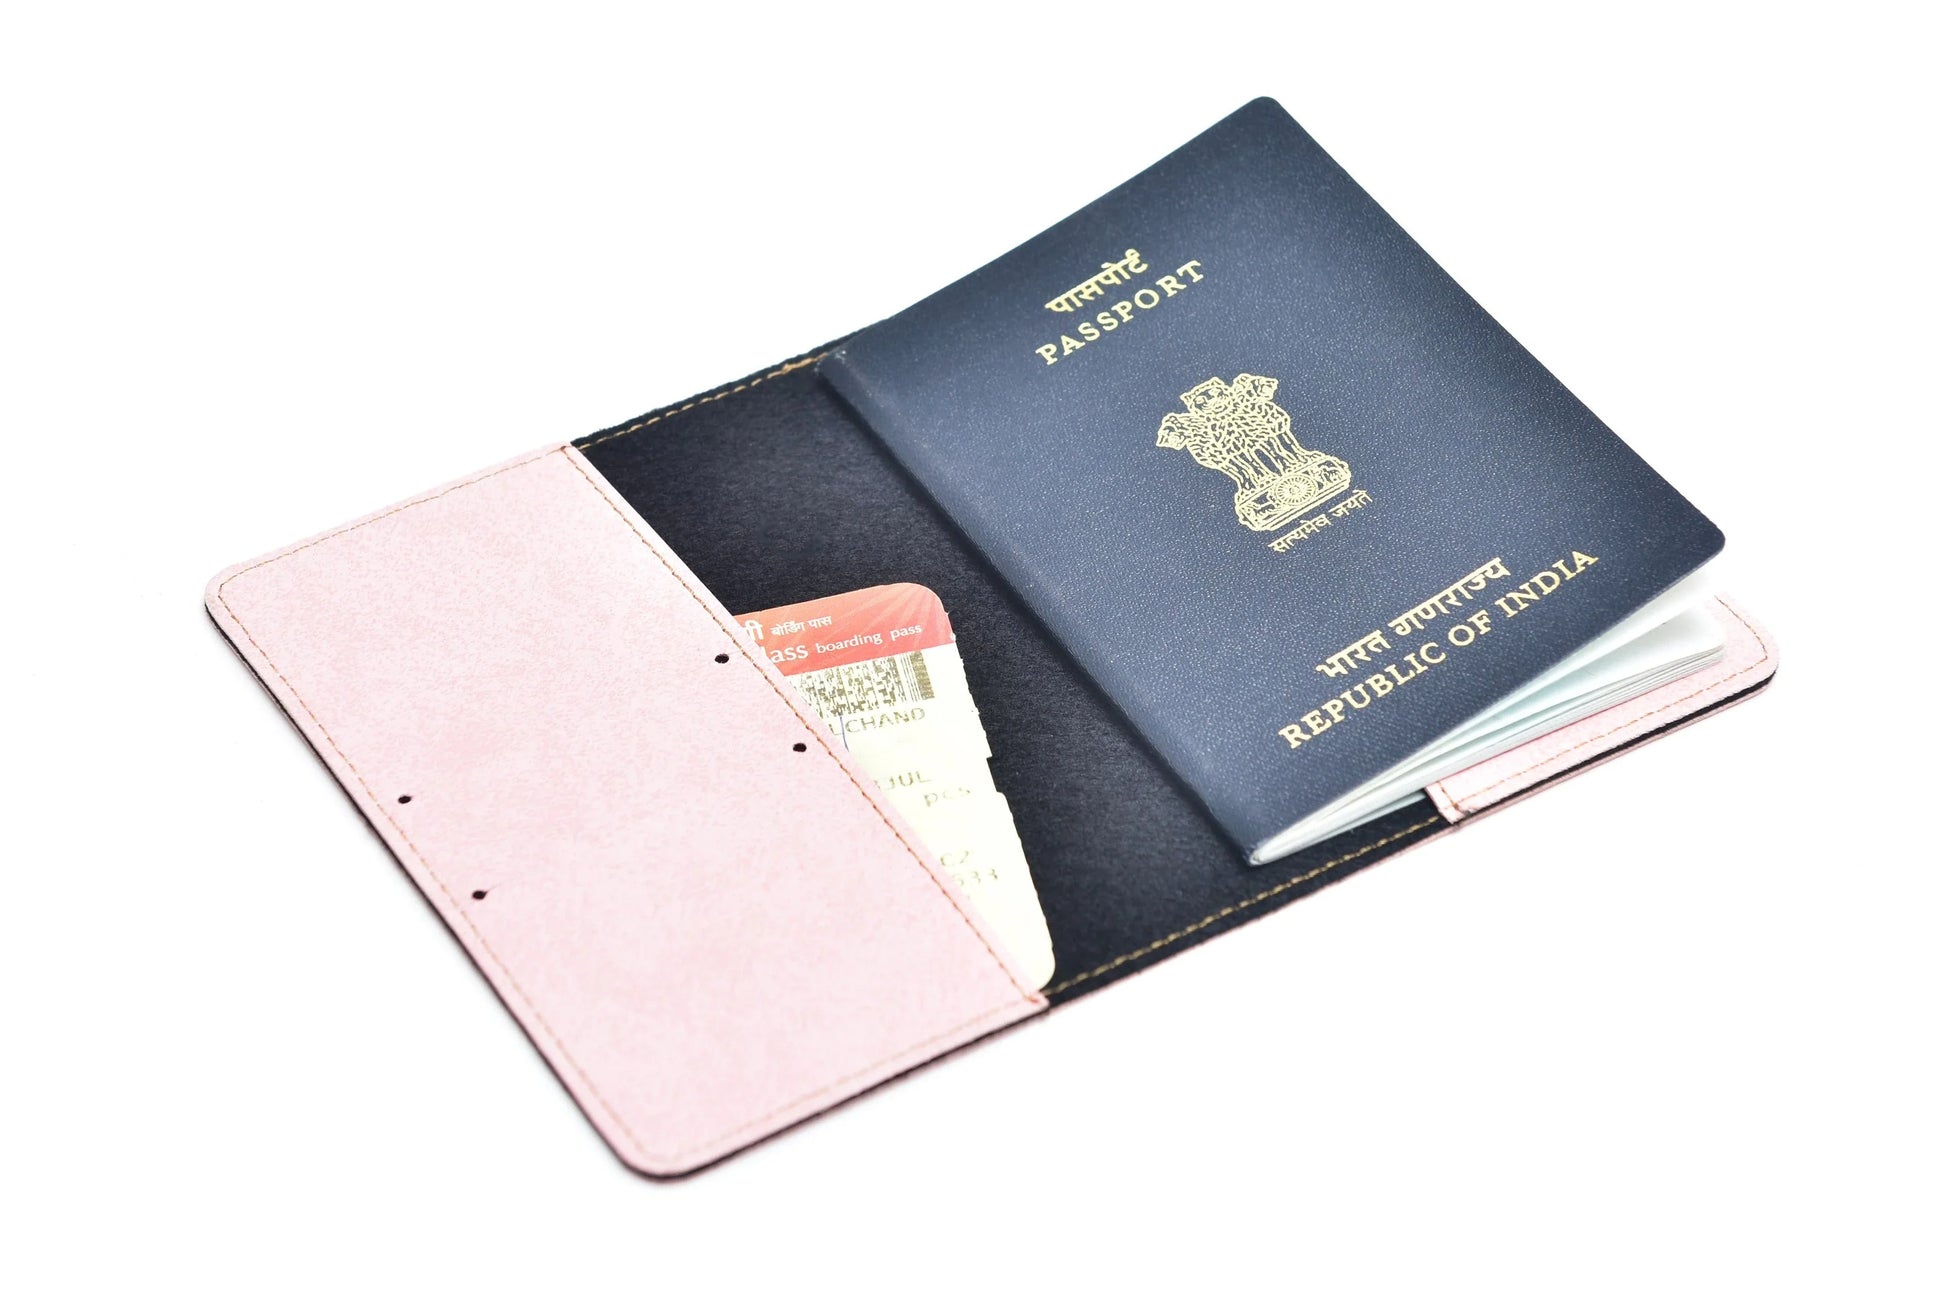 inside or open view of Classy Leather Customised Passport Cover with Charm- pink